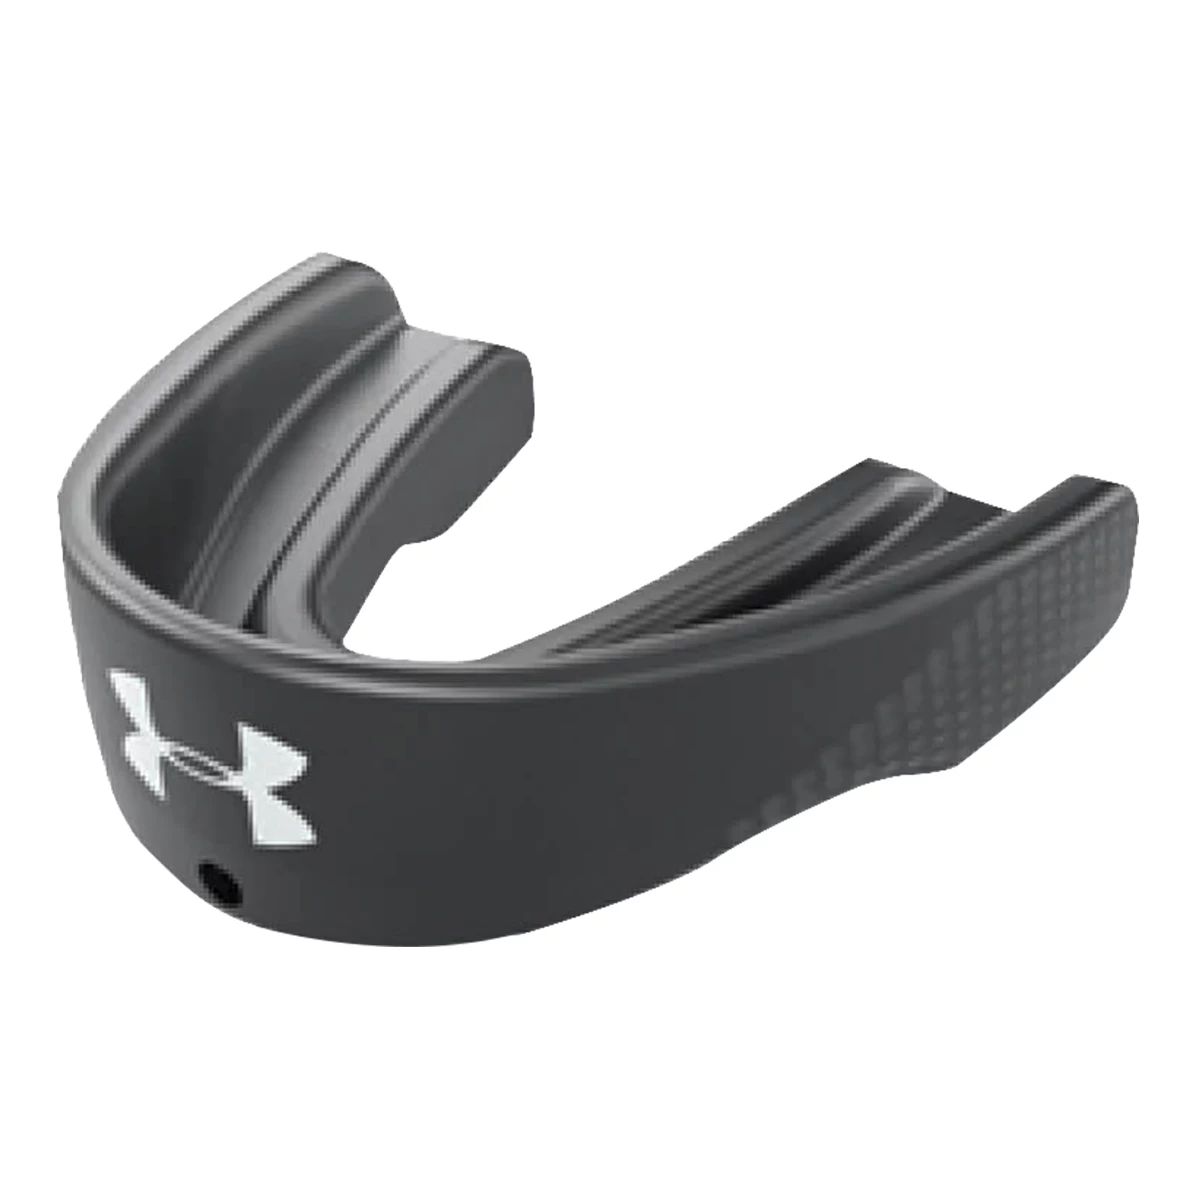 Under Armour Gameday Youth Mouth Guard